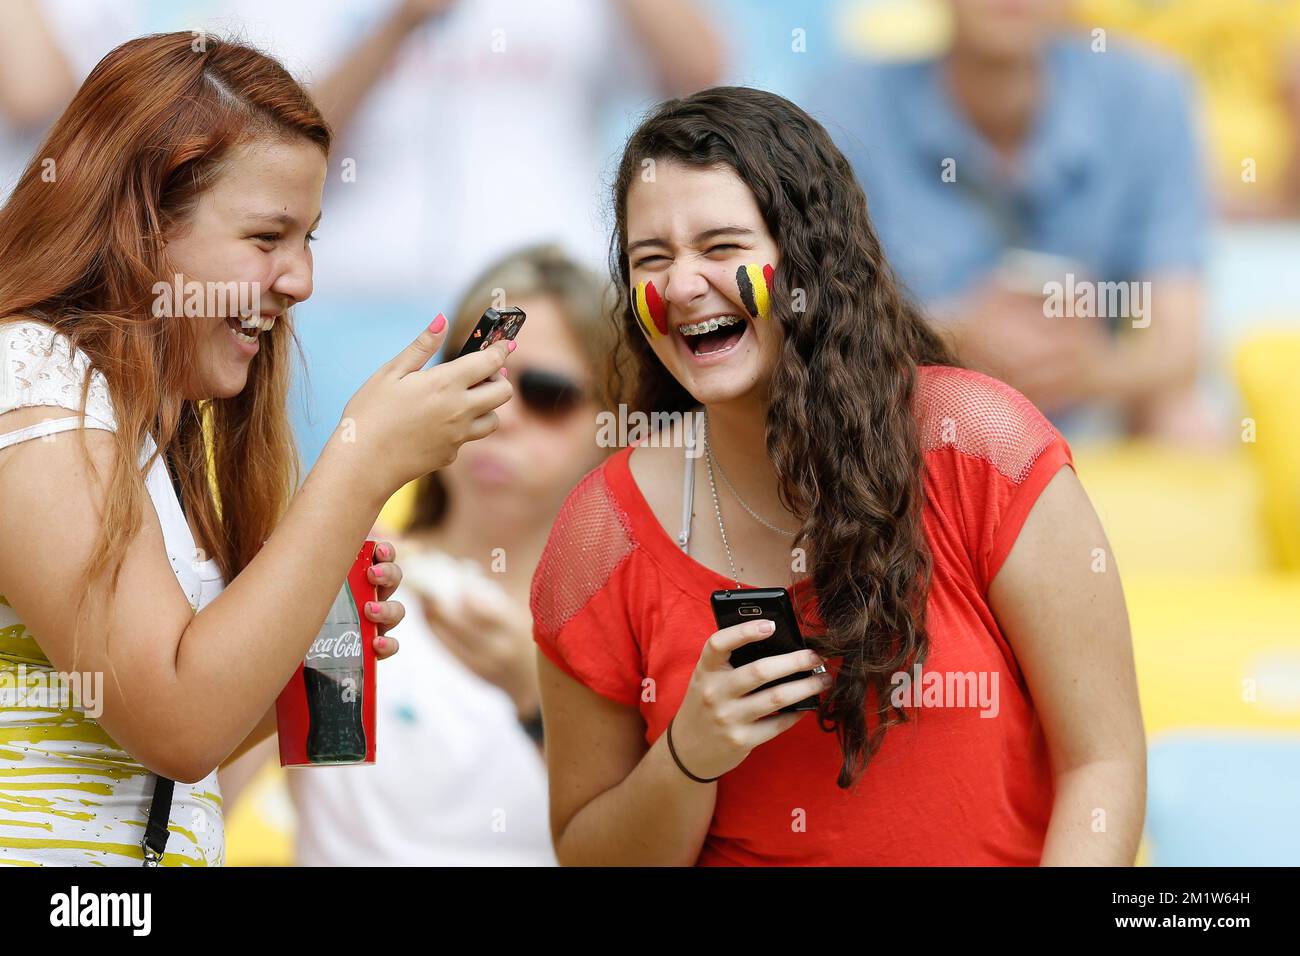 20140622 - RIO DE JANEIRO, BRAZIL: Red Devils' supporters pictured before a soccer game between Belgian national team The Red Devils and Russia in Rio de Janeiro, Brazil, the second game in Group H of the first round of the 2014 FIFA World Cup, Sunday 22 June 2014. BELGA PHOTO BRUNO FAHY Stock Photo